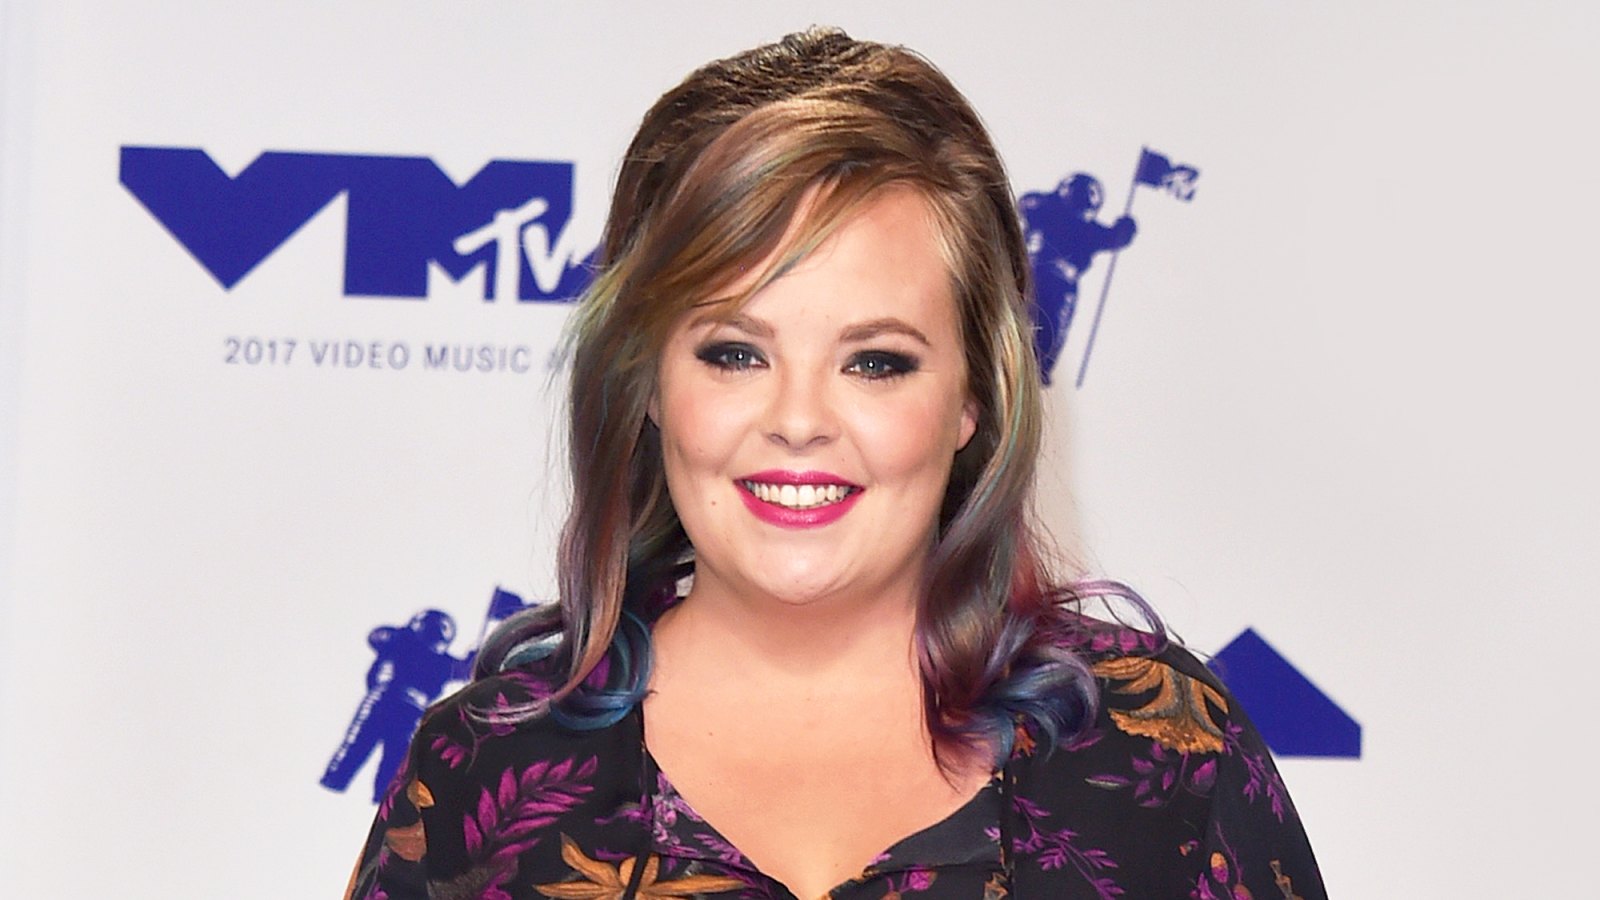 Catelynn Lowell attends the 2017 MTV Video Music Awards at The Forum in Inglewood, California.